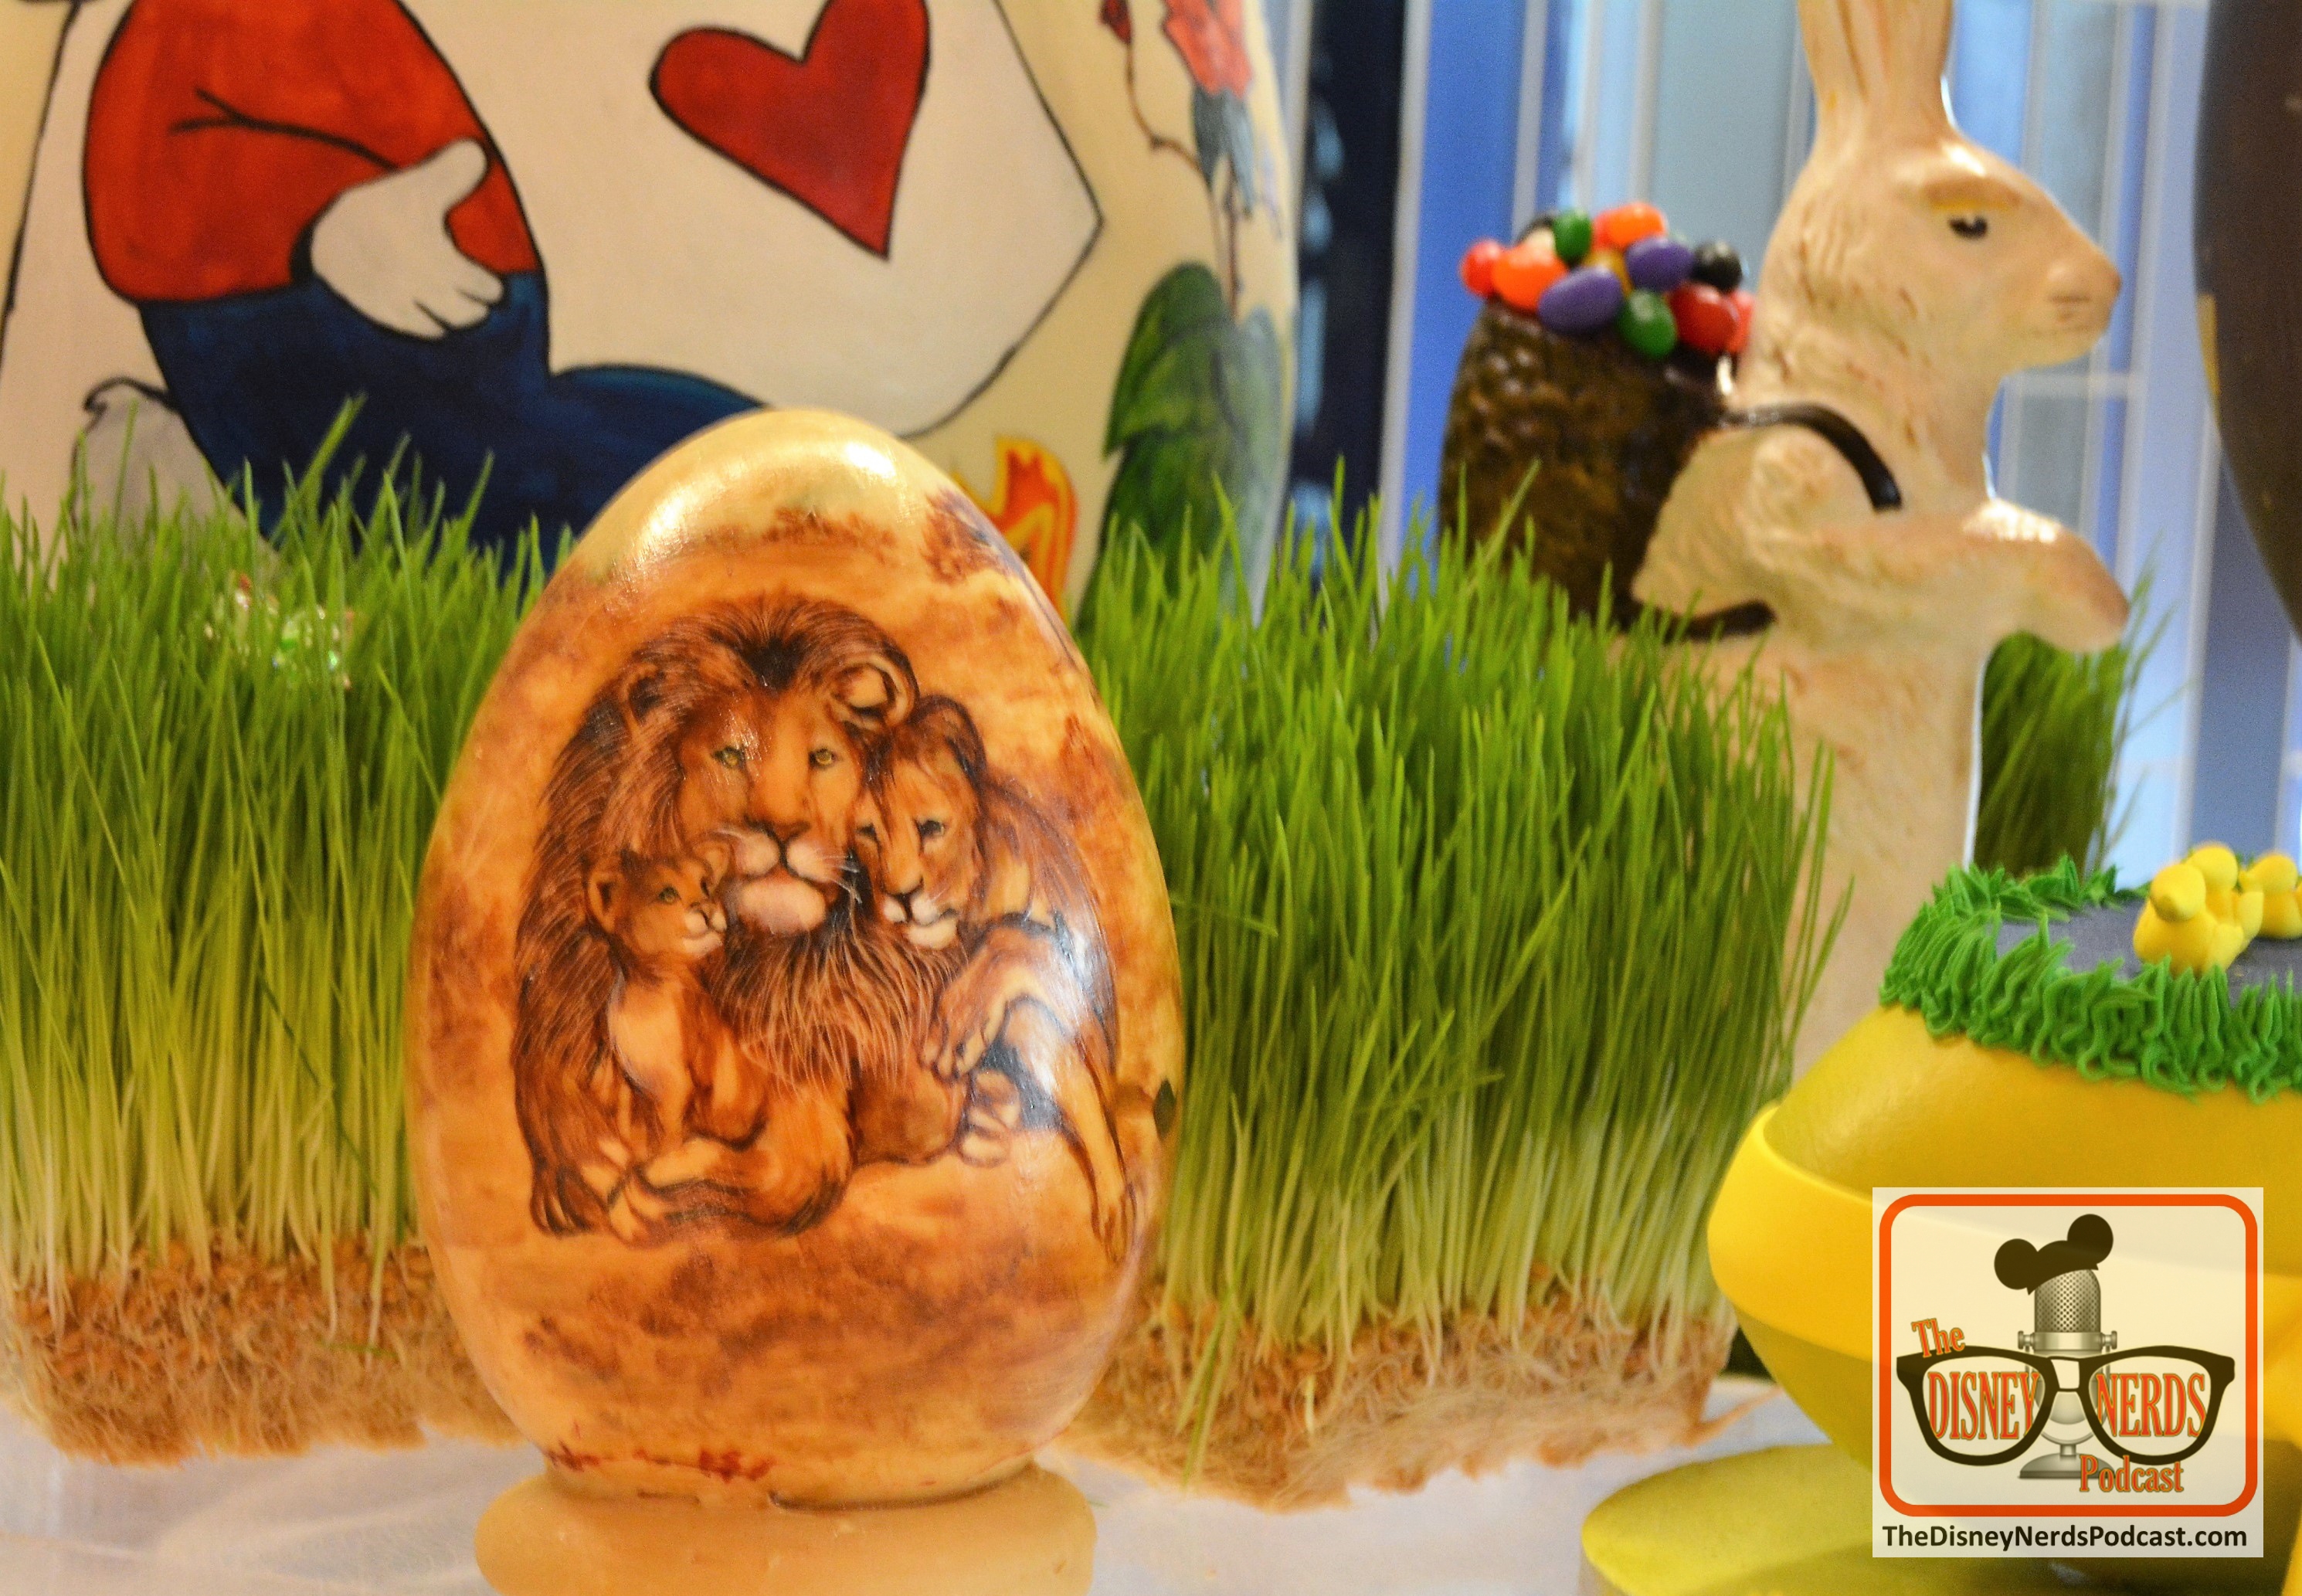 The 2nd Annual Easter Egg Display at the Walt Disney World Contemporary Resort - 2018